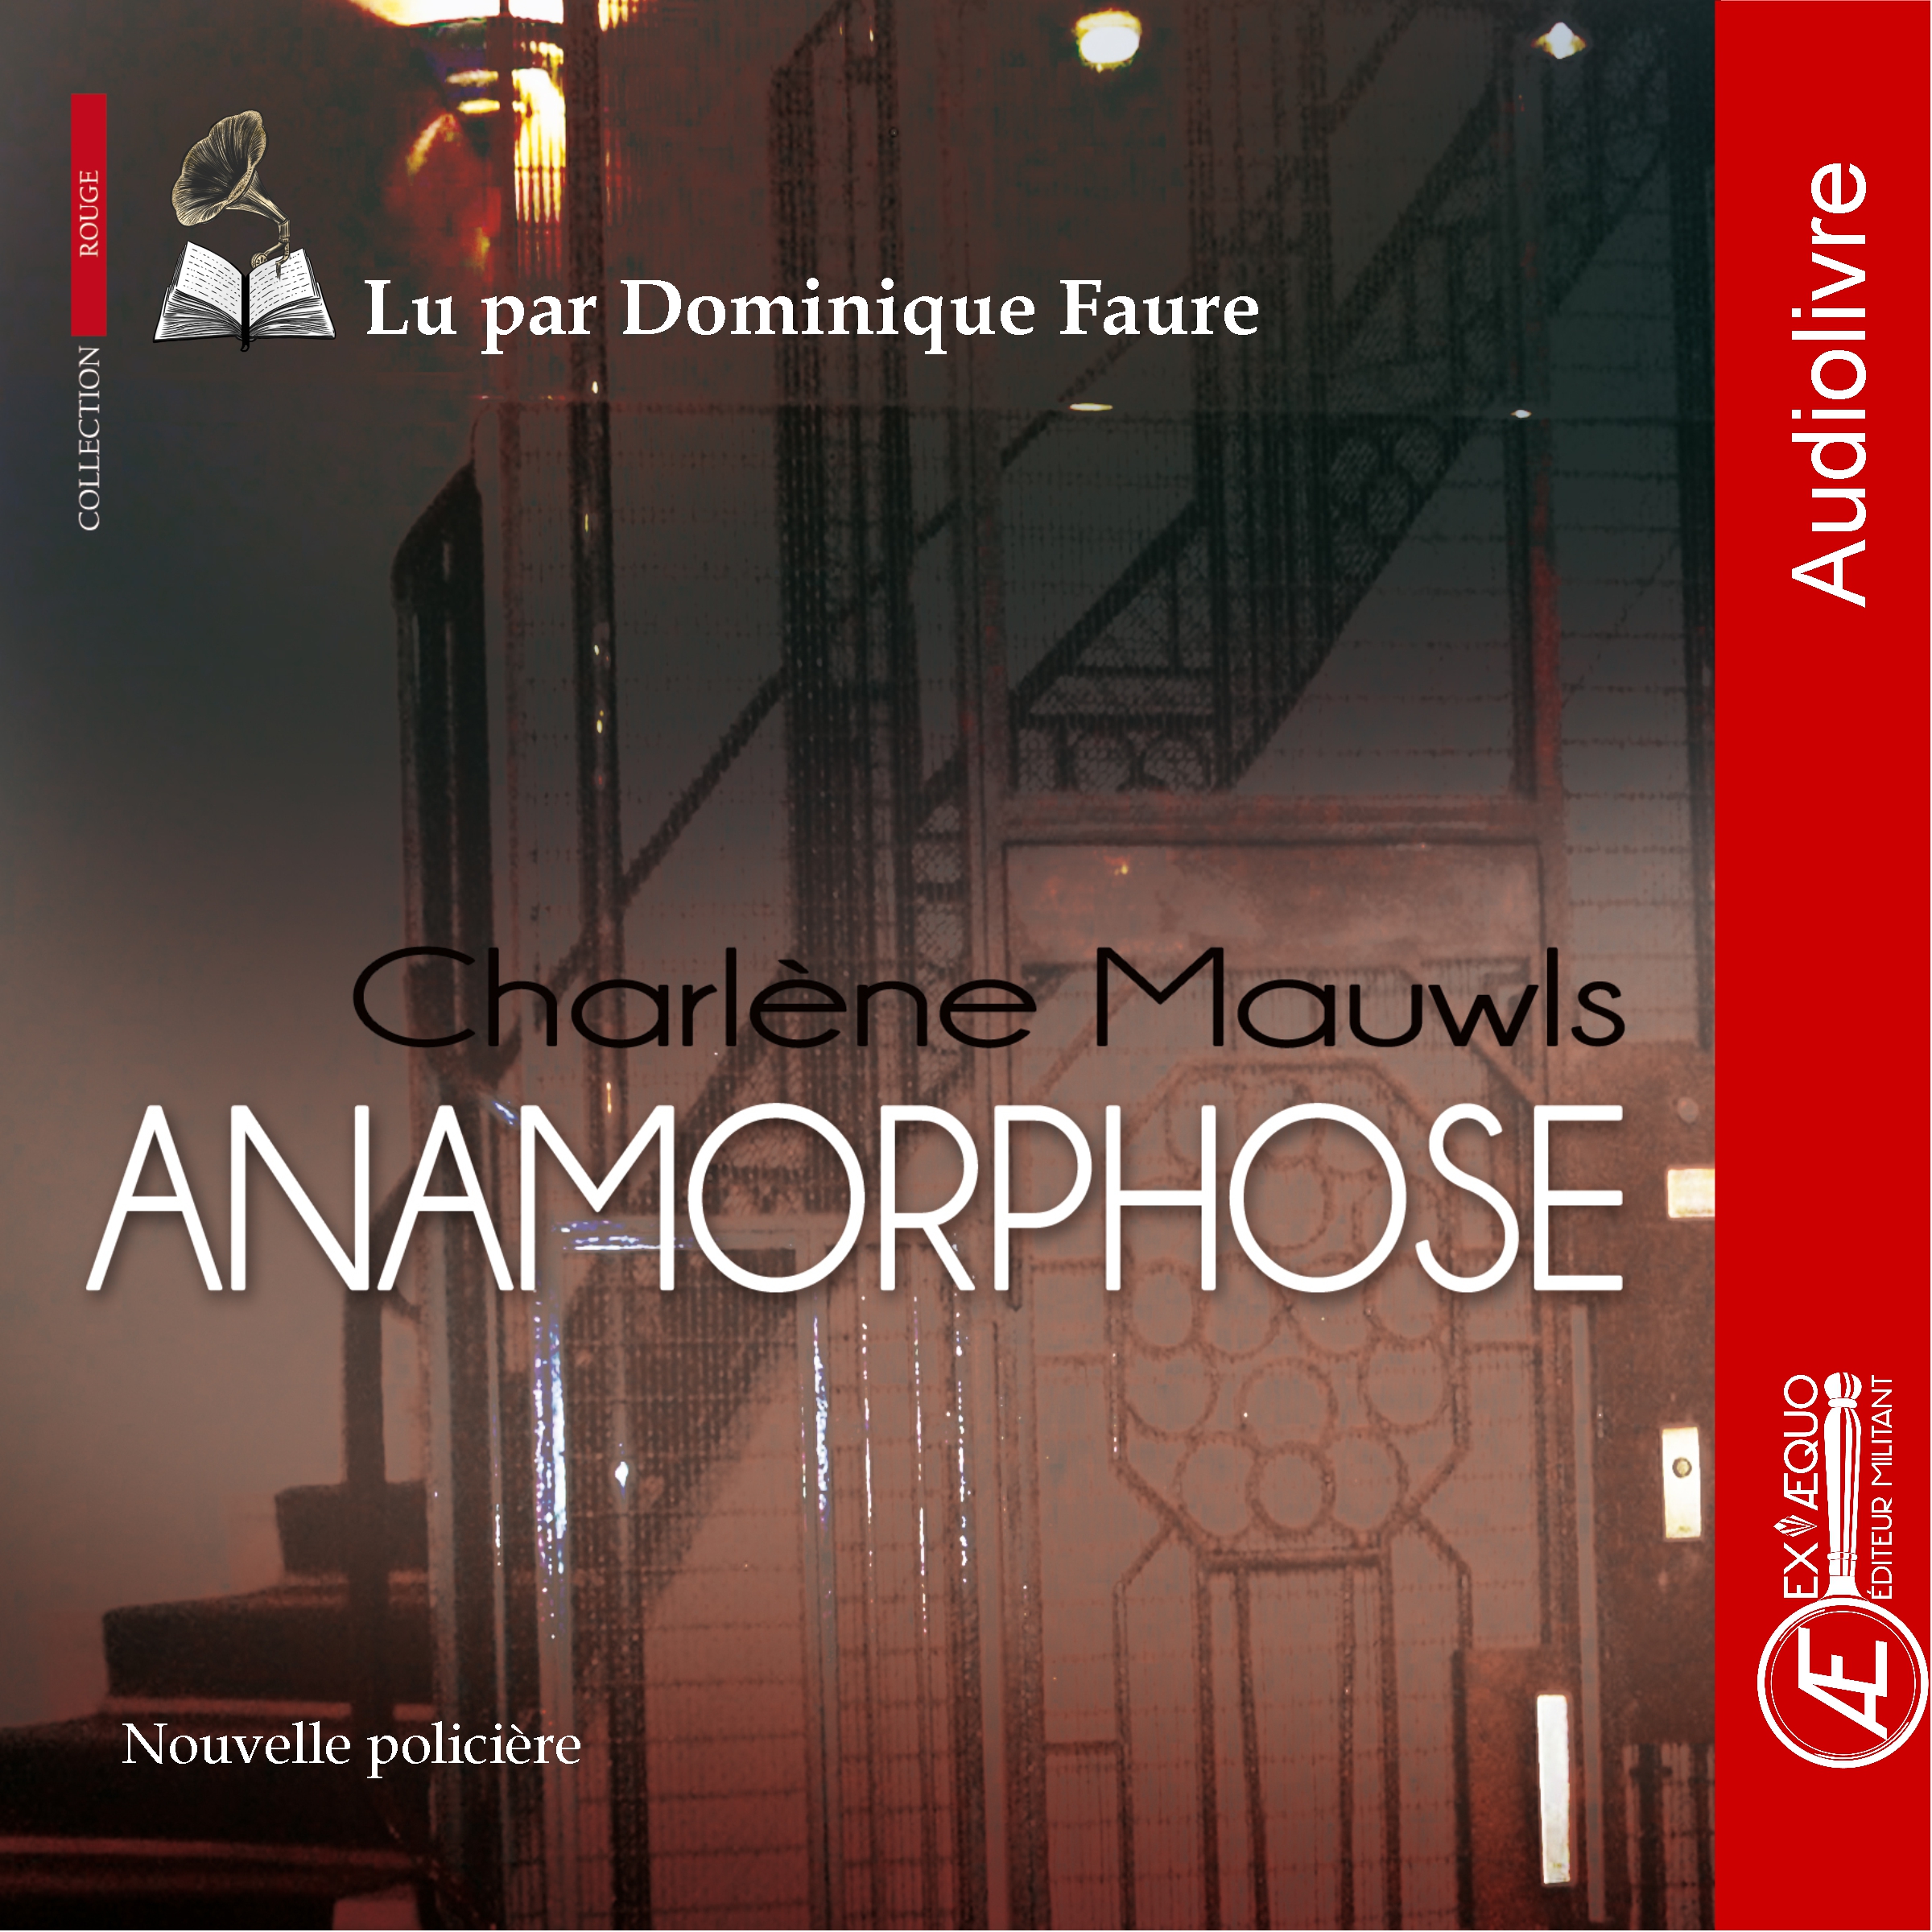 You are currently viewing Anamorphose, de Charlène Mauwls